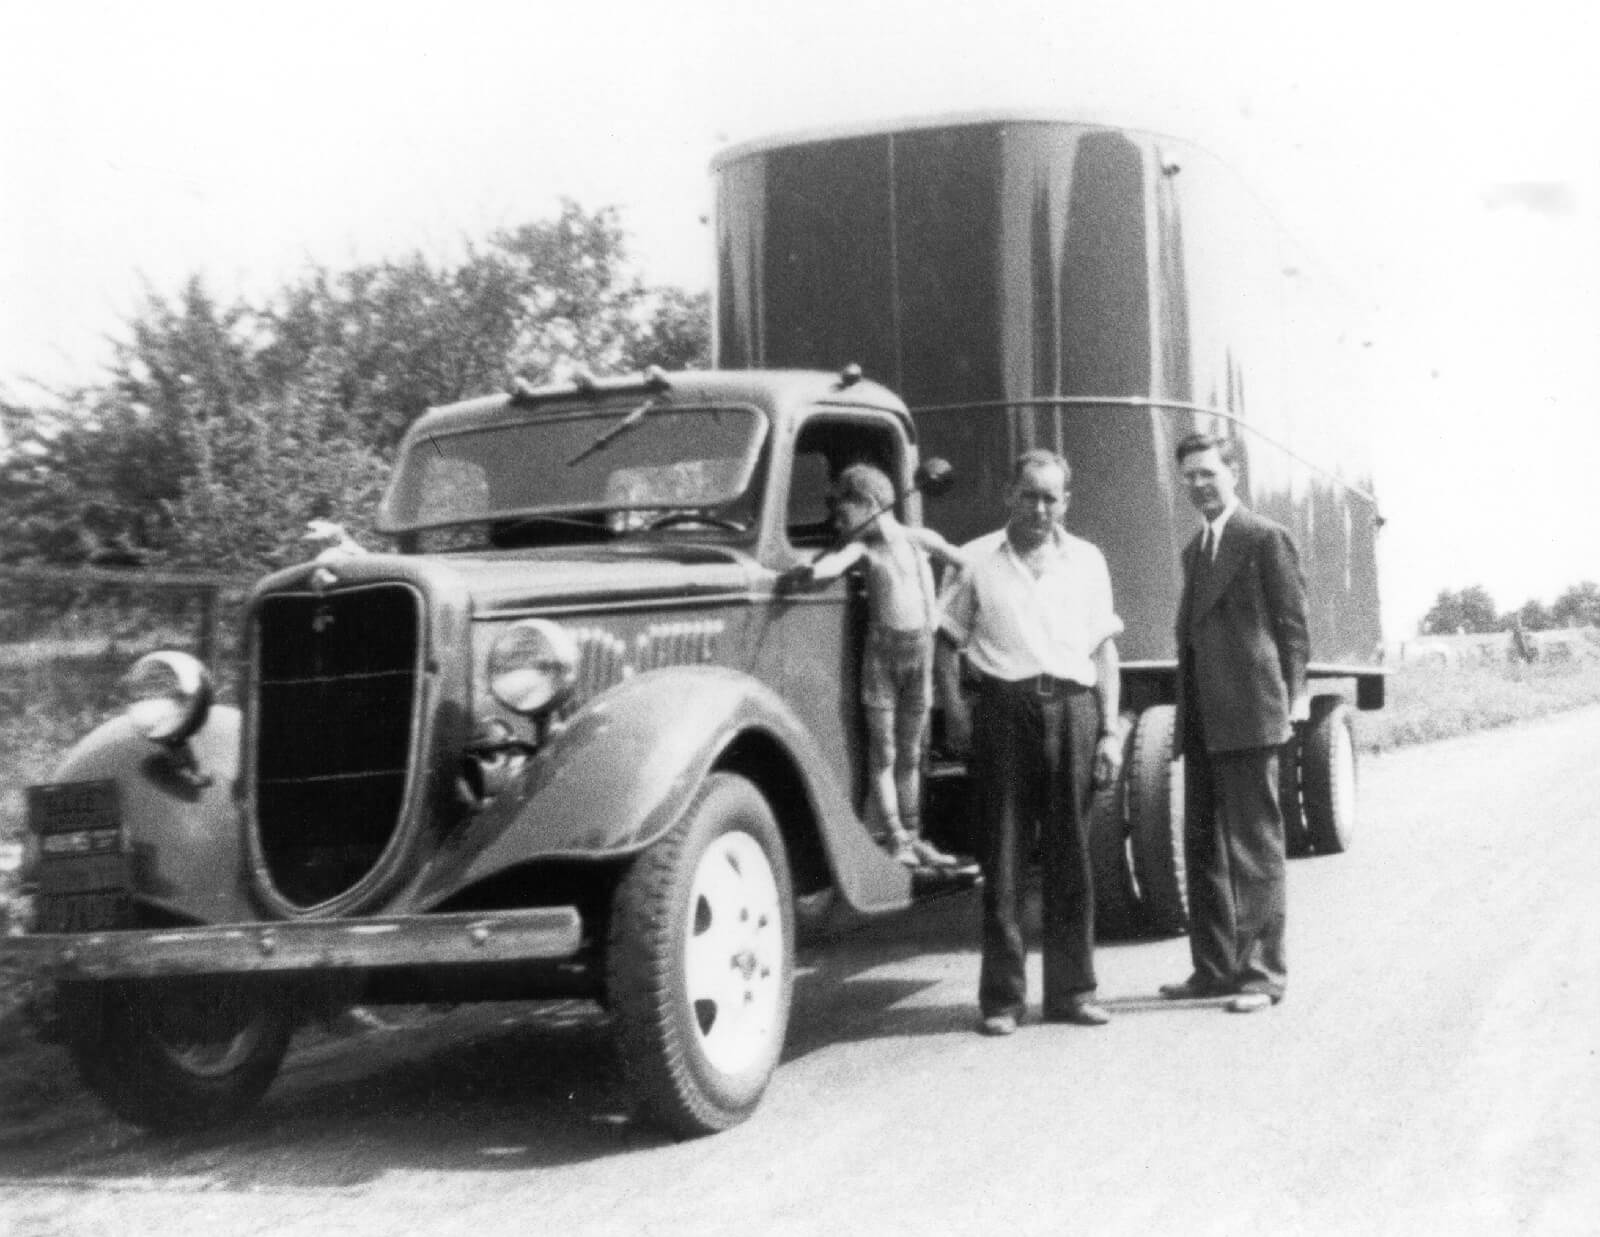 Vintage photo of three men with an old Dart truck